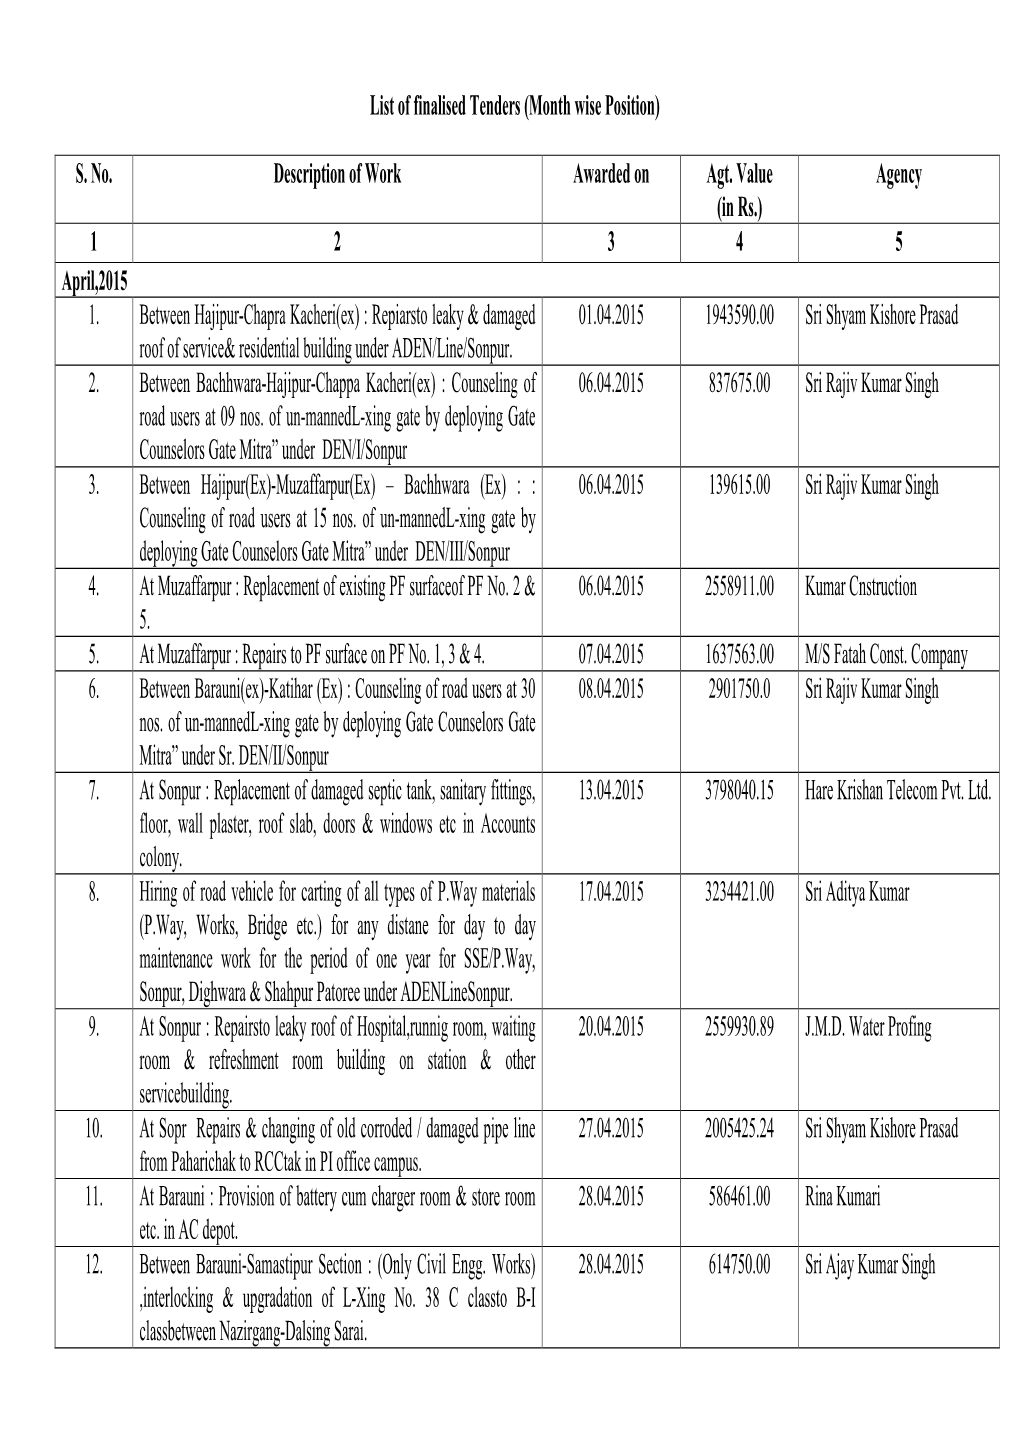 List of Finalised Tenders (Month Wise Position) S. No. Description of Work Awarded on Agt. Value (In Rs.) Agency 1 2 3 4 5 Apri